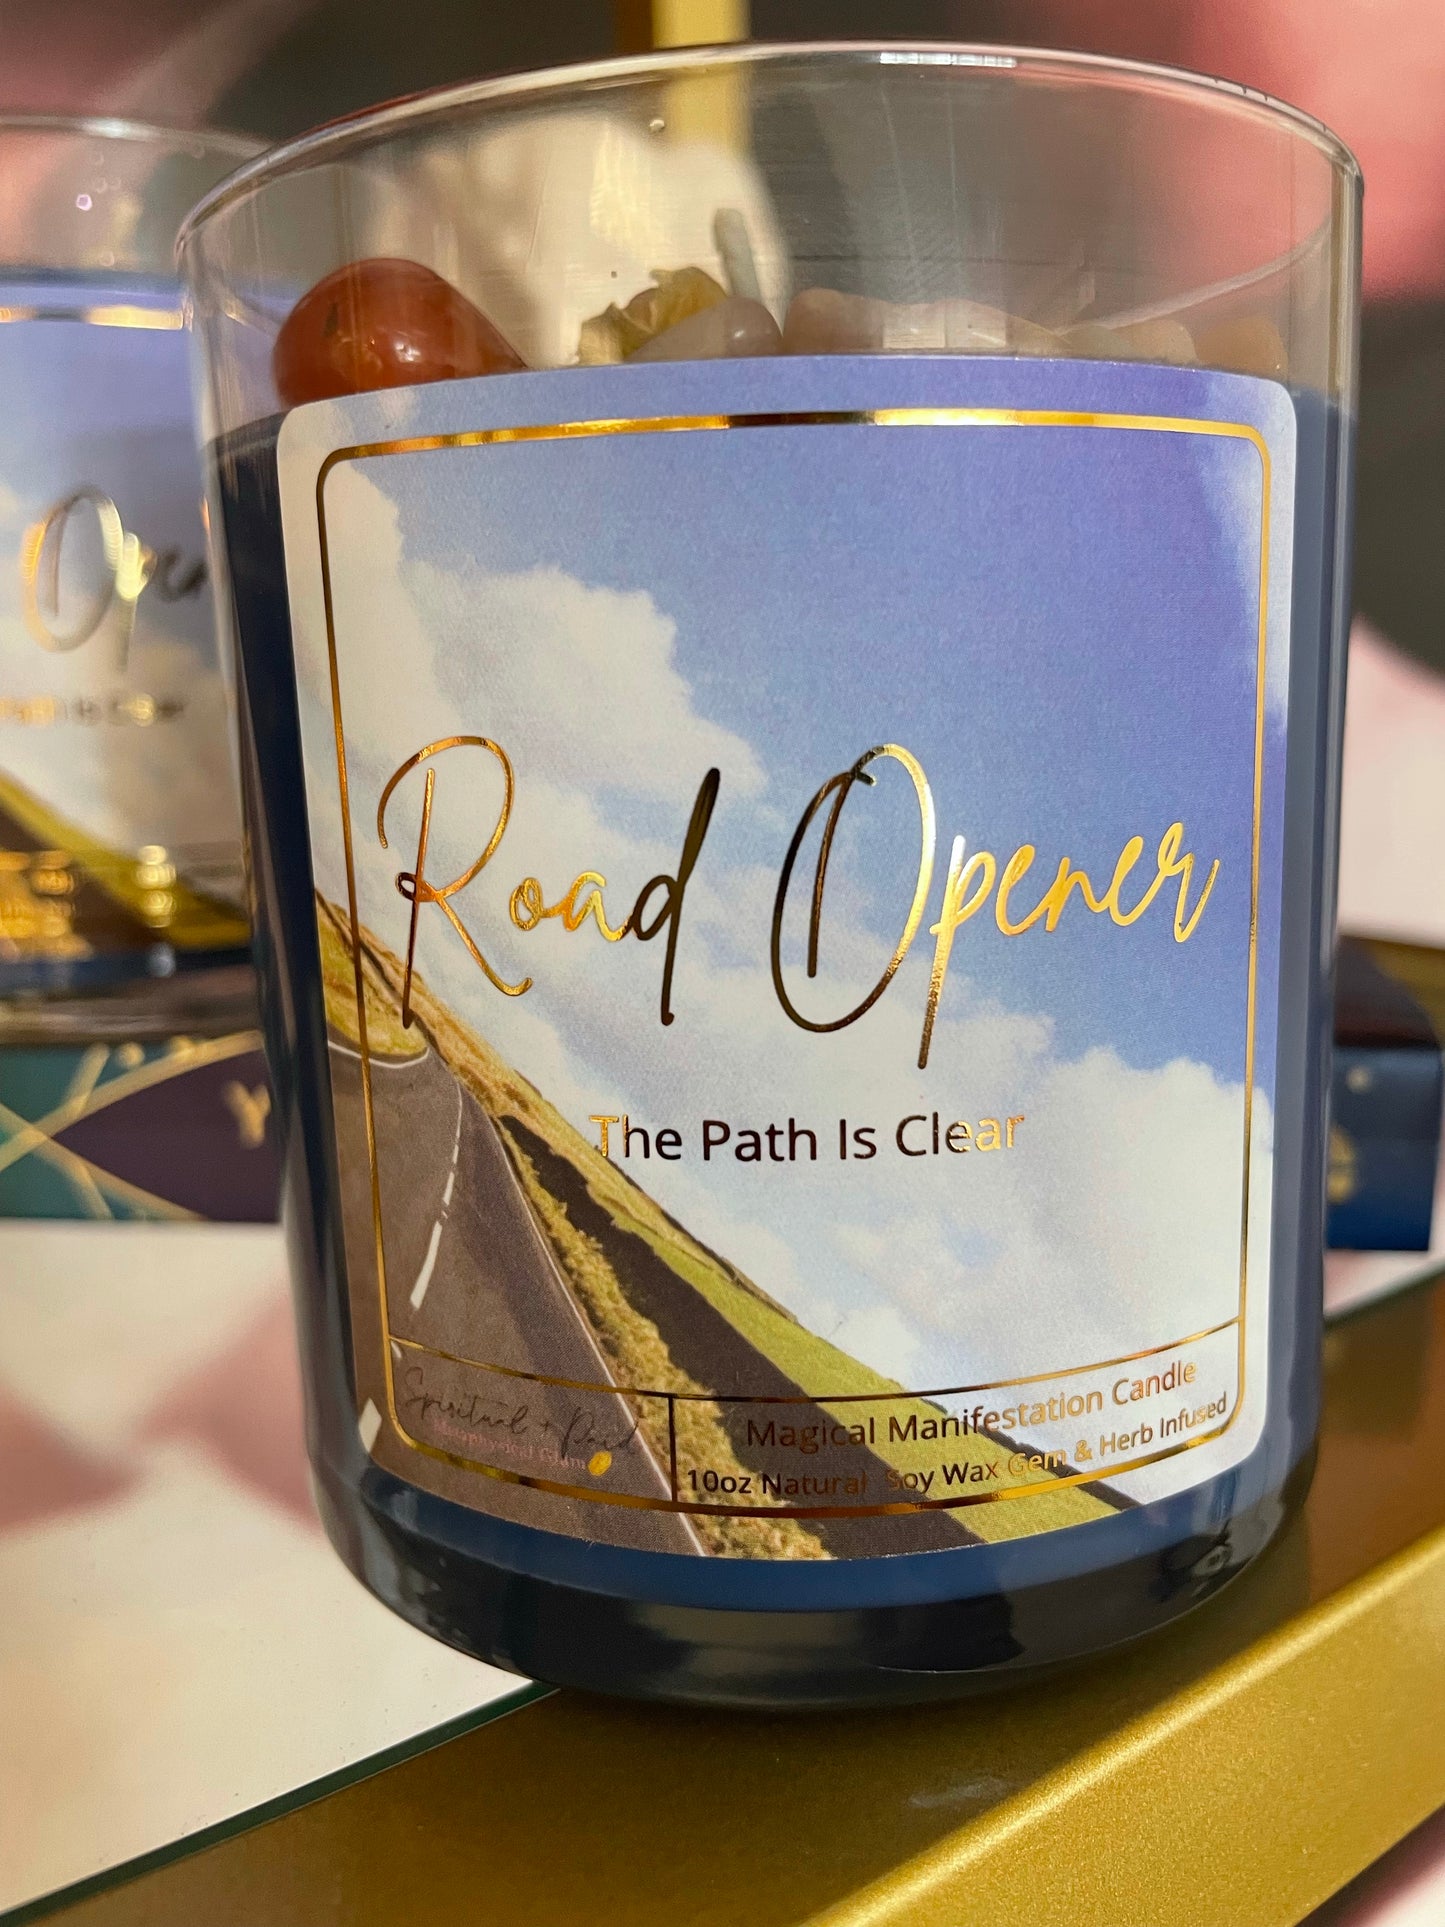 Open Roads Manifestation Candle - Remove blockages • Clear The path